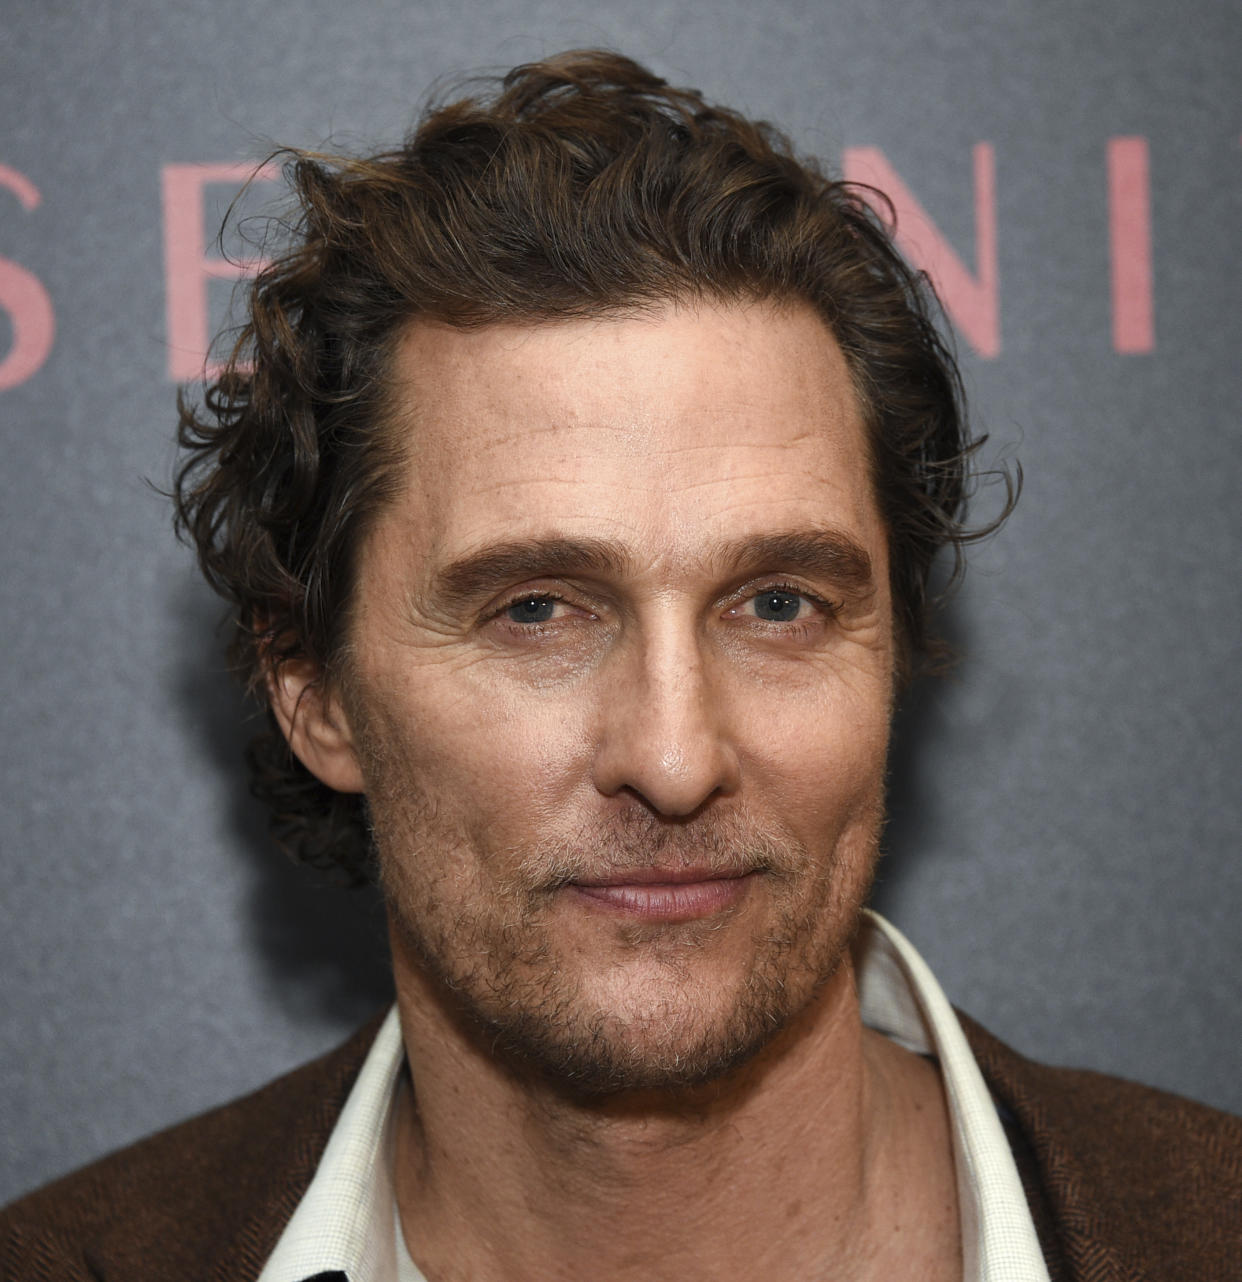 Actor Matthew McConaughey attends a special screening of "Serenity" at the Museum of Modern Art on Wednesday, Jan. 23, 2019, in New York. (Photo by Evan Agostini/Invision/AP)